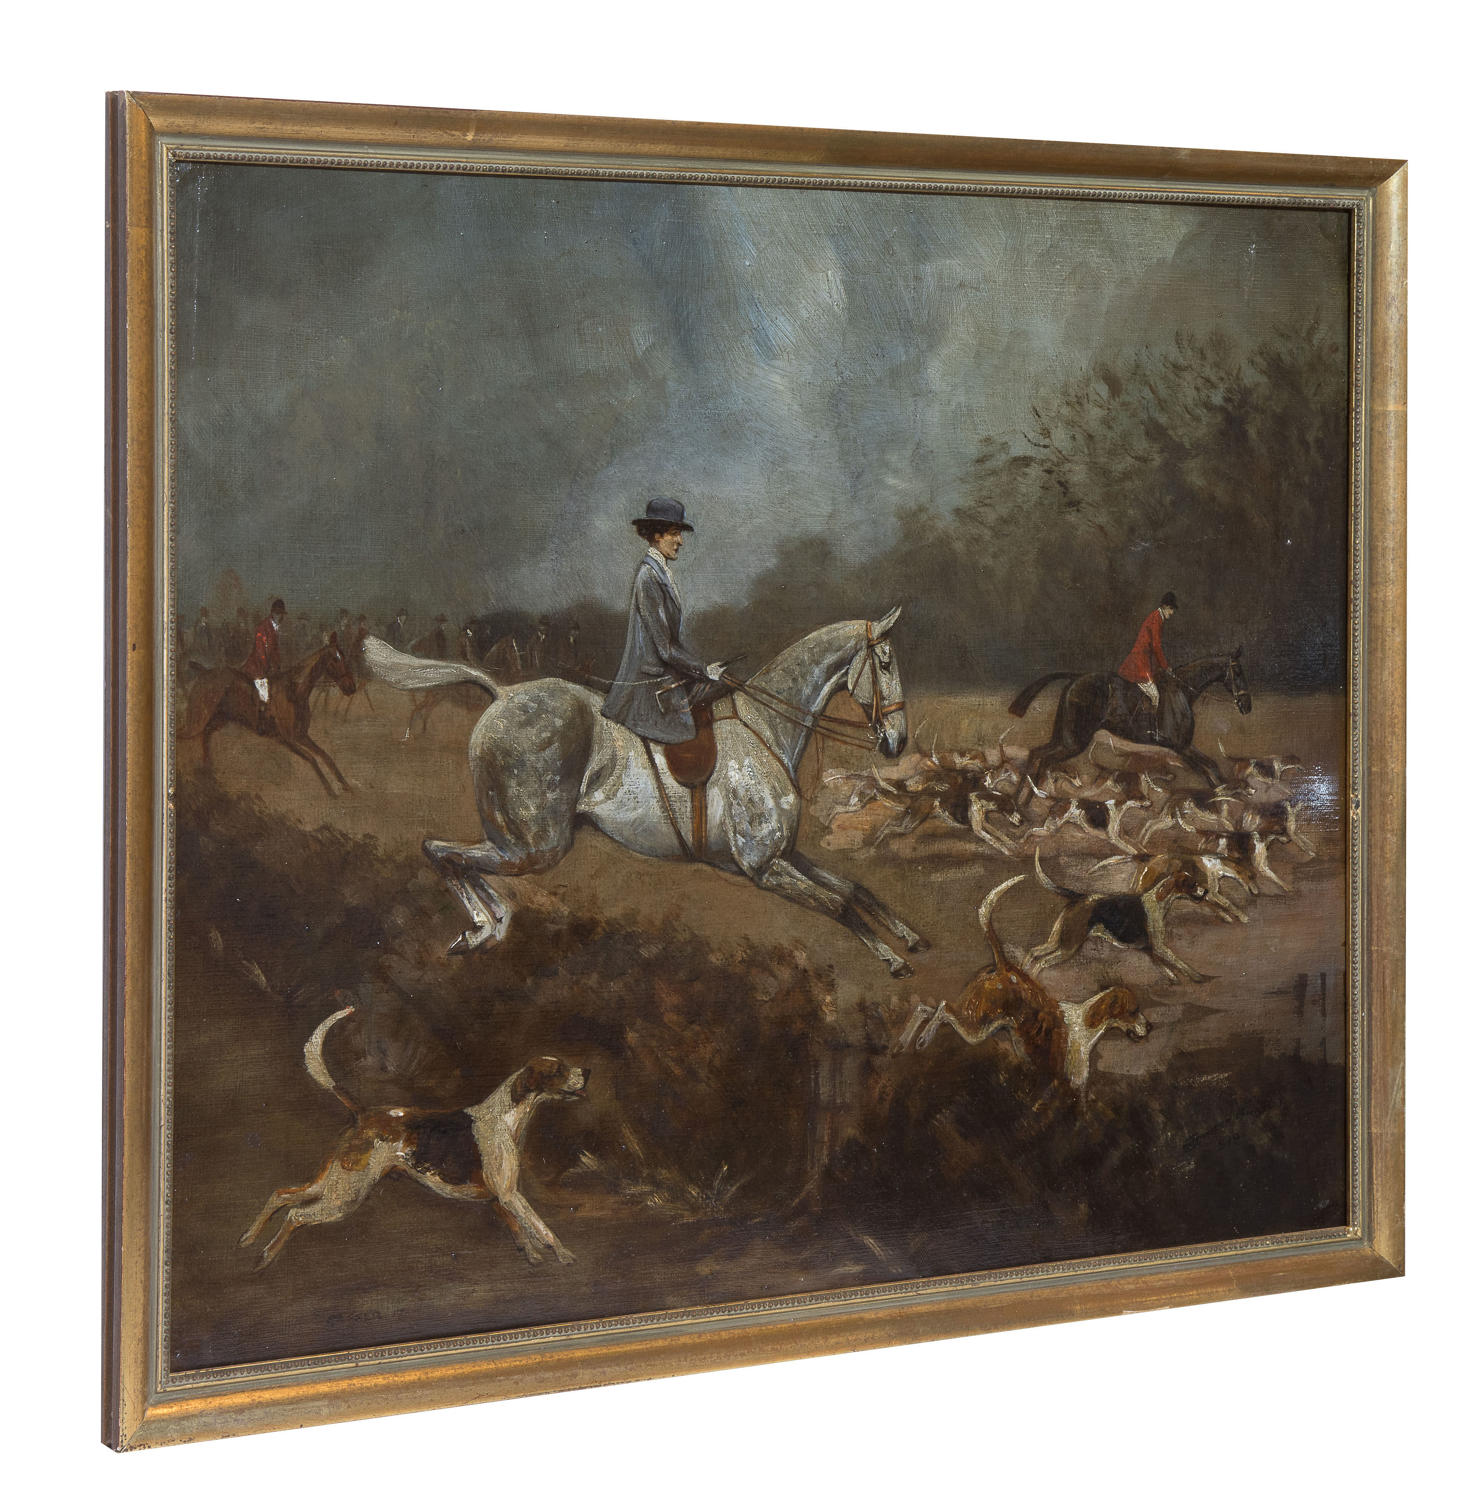 Country woman hunt scene oil on canvas